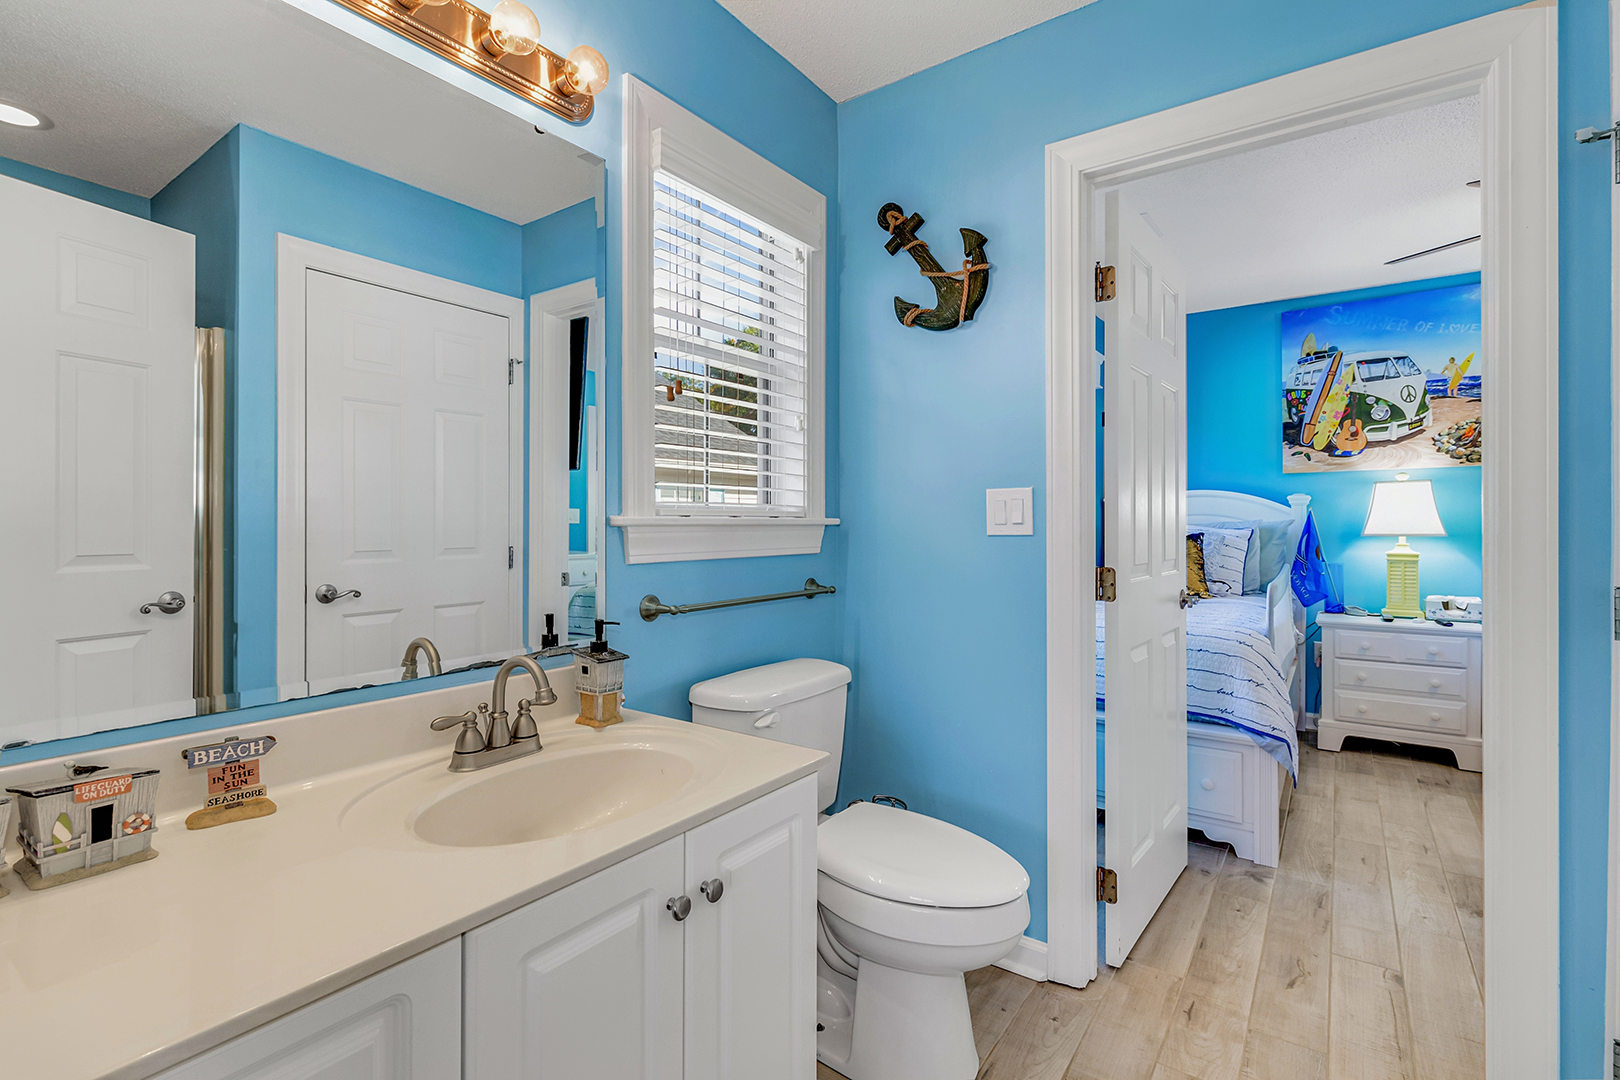 Bathroom with blue walls and white doors